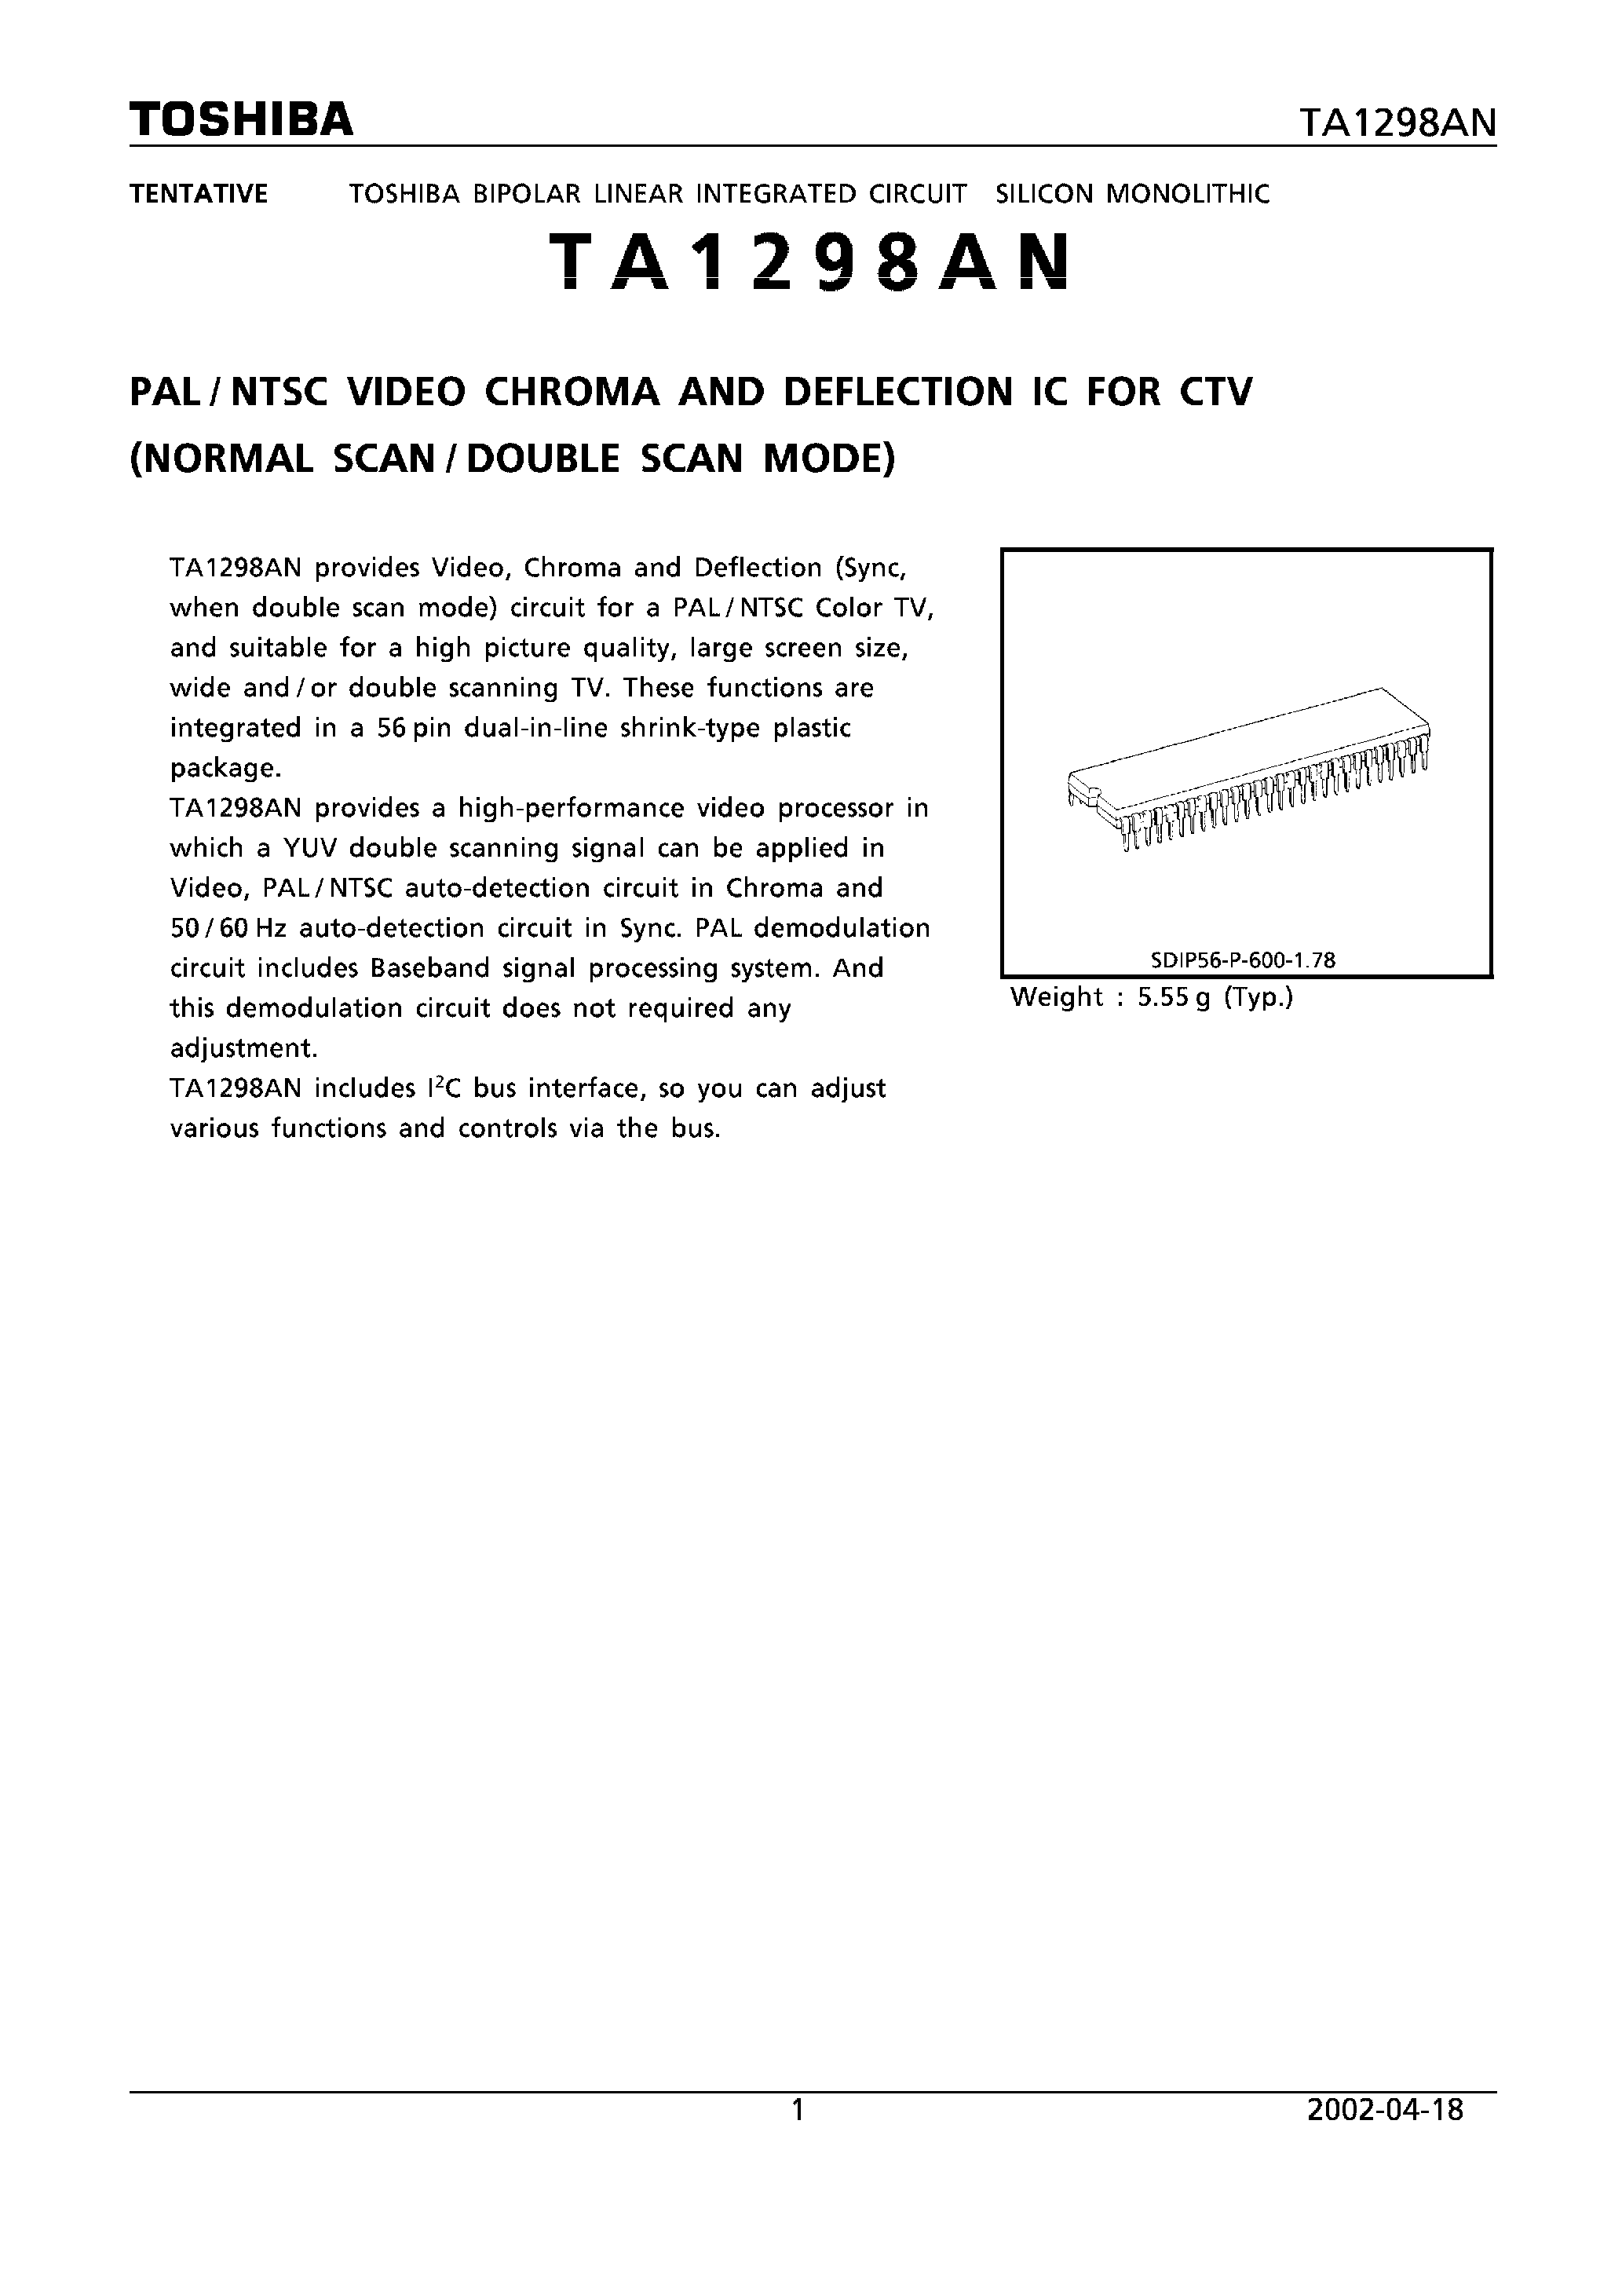 Datasheet TA1298AN - PAL/NTSC VIDEO CHROMA AND DEFLECTION IC FOR CTV page 1